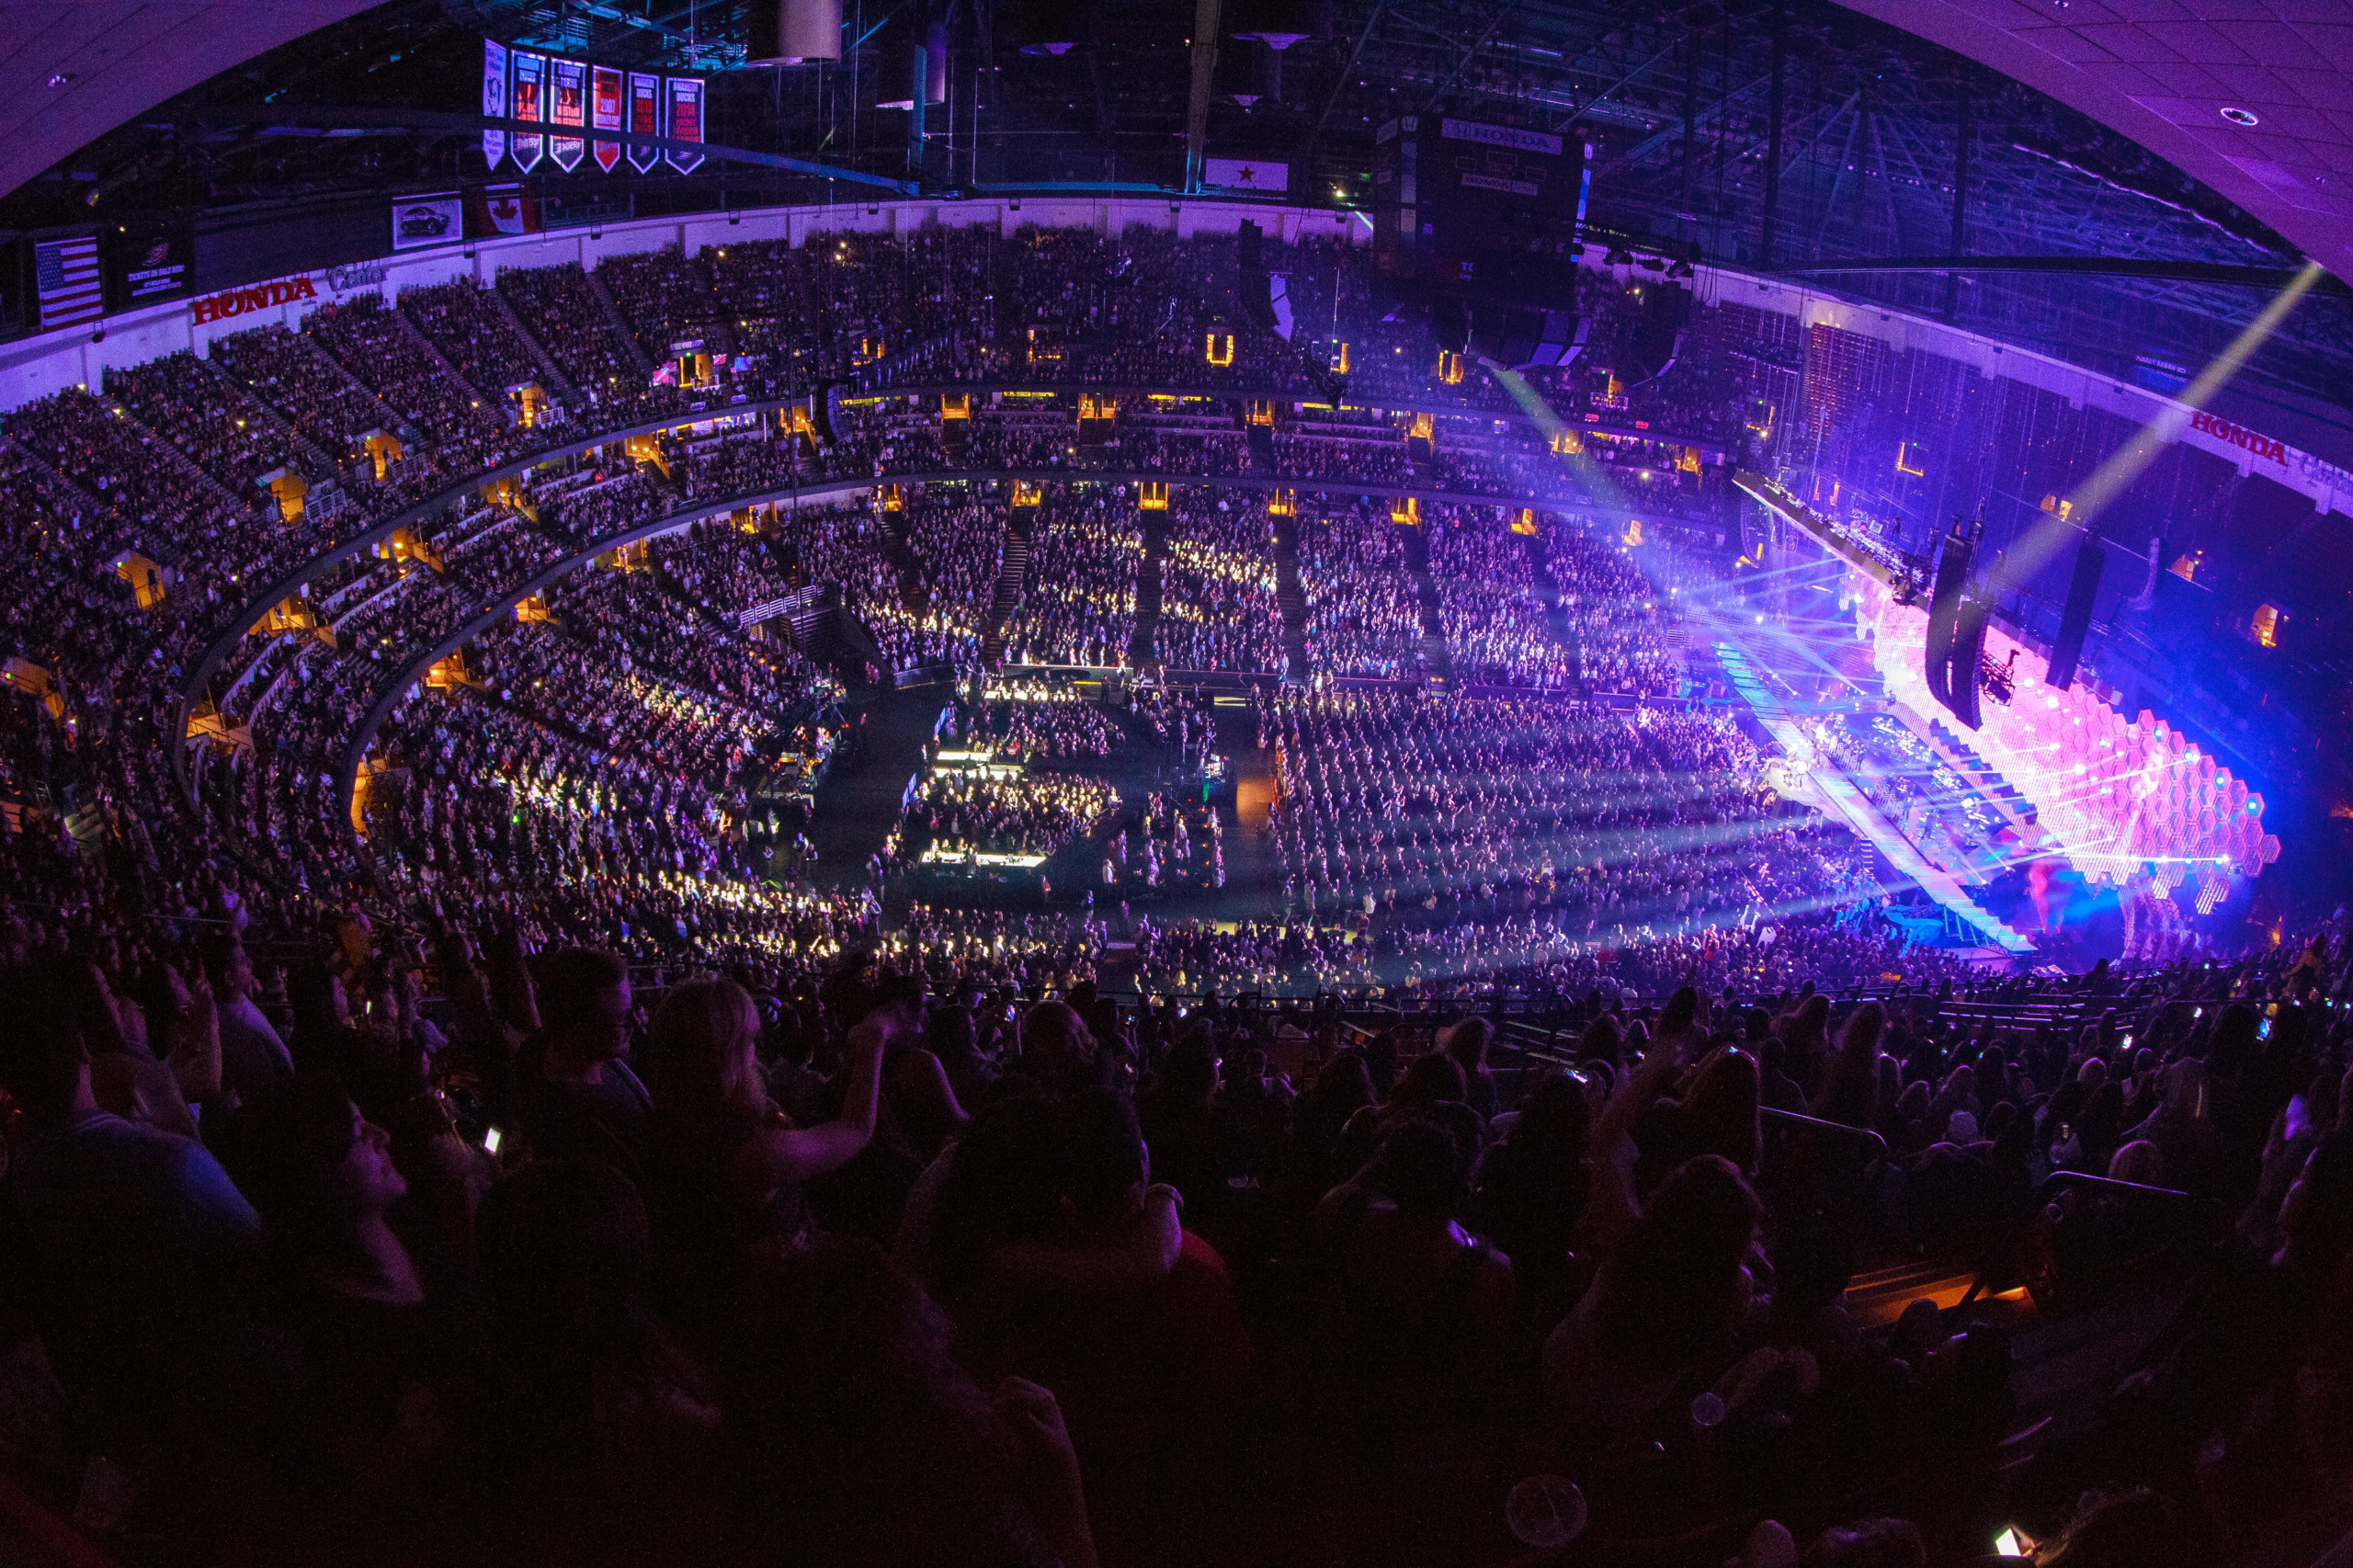 Our Best Tips & Tricks for Getting to a Concert on Time